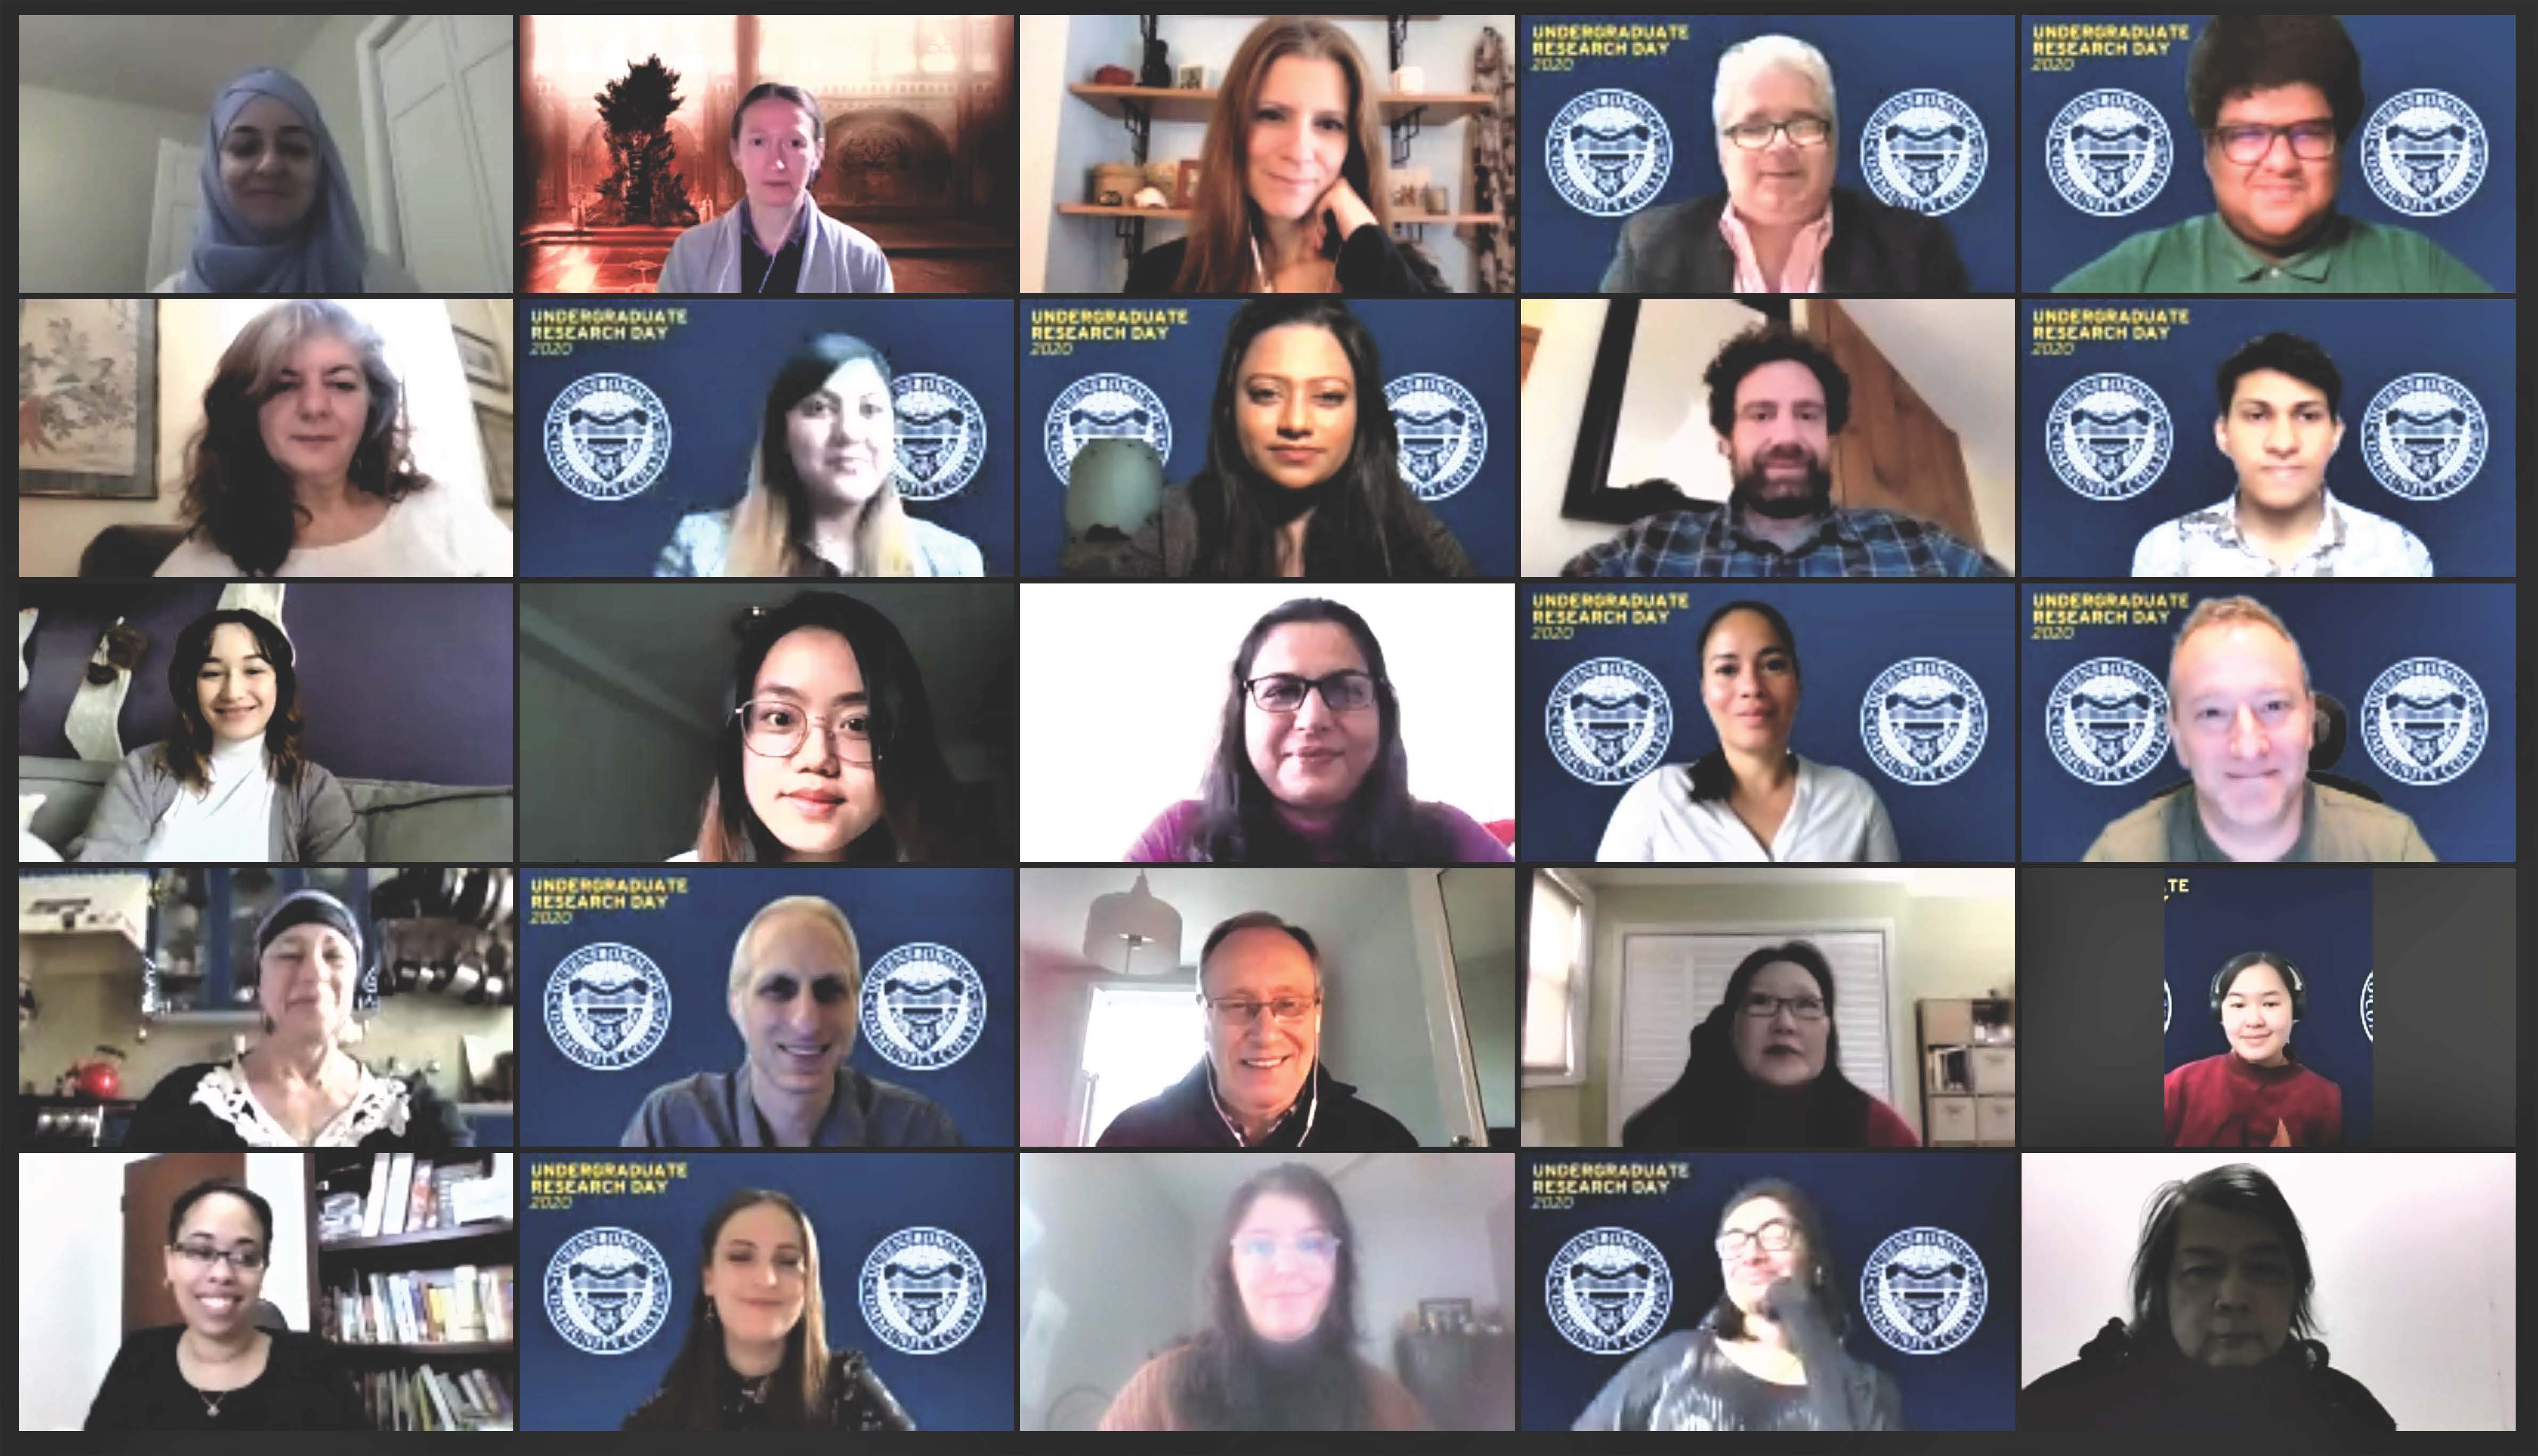 Participants in the 2020 Queensborough Undergraduate Research Day virtual gathering